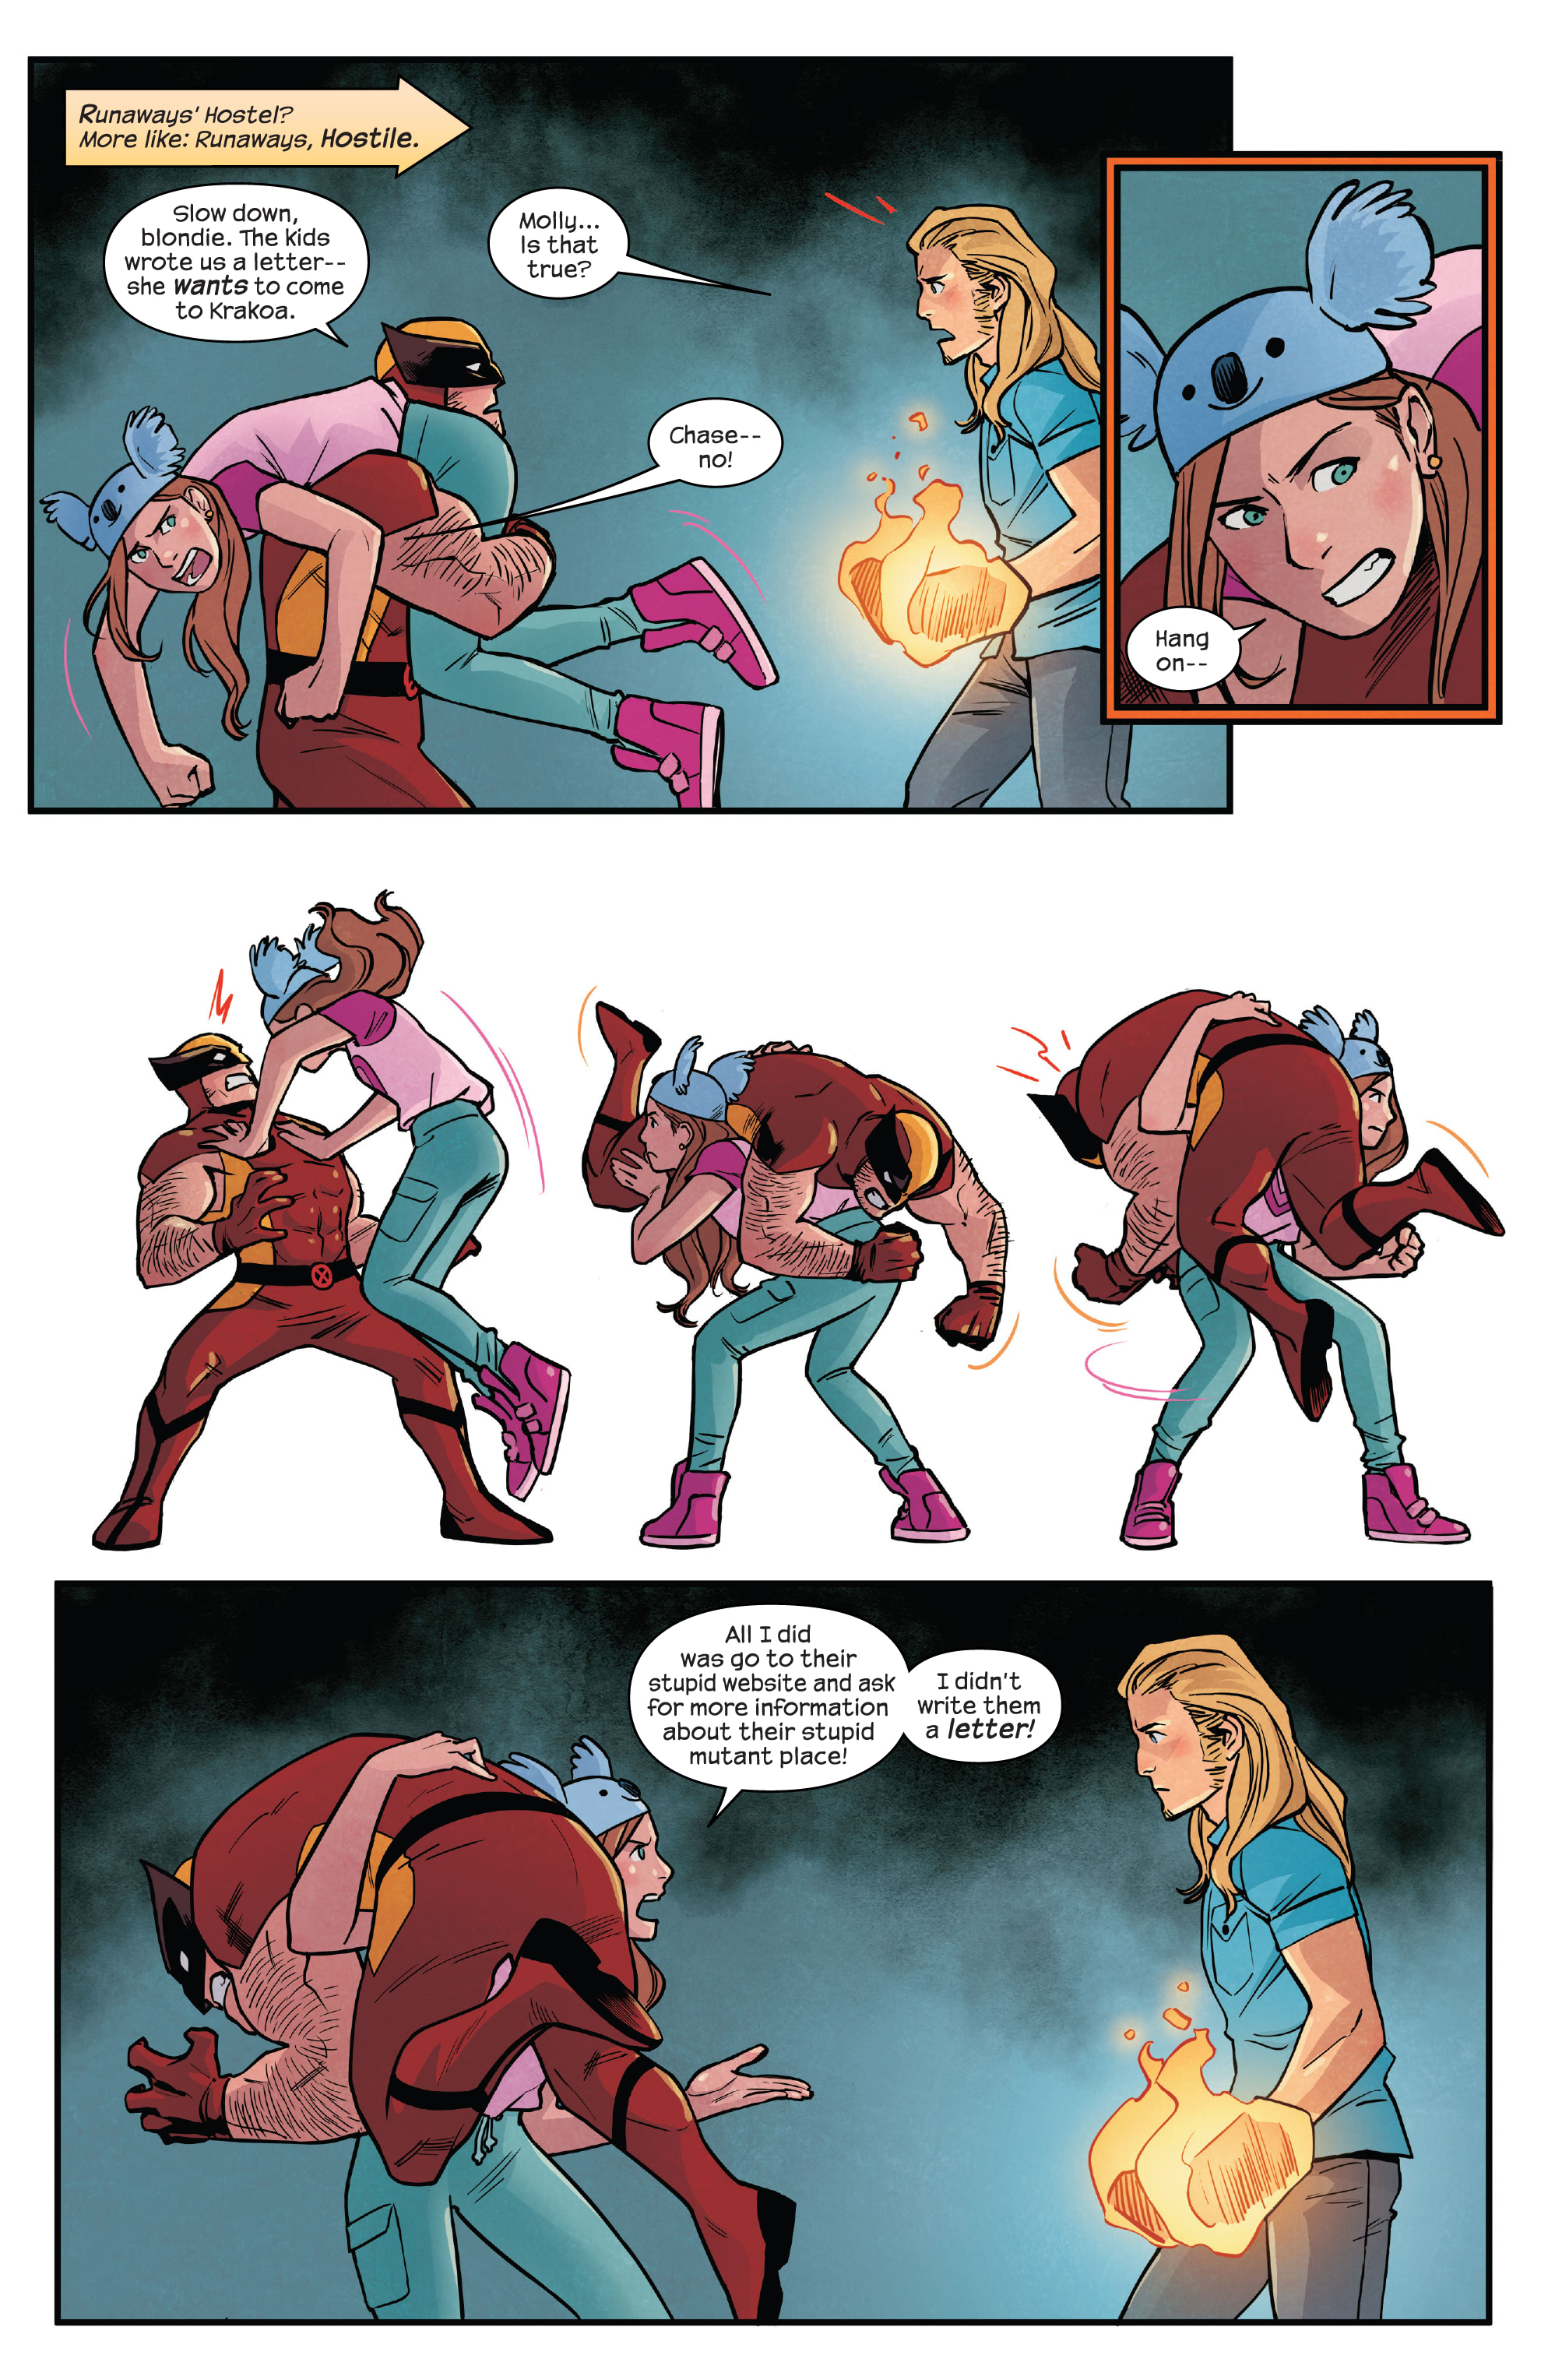 Runaways (2017-): Chapter 34 - Page 3